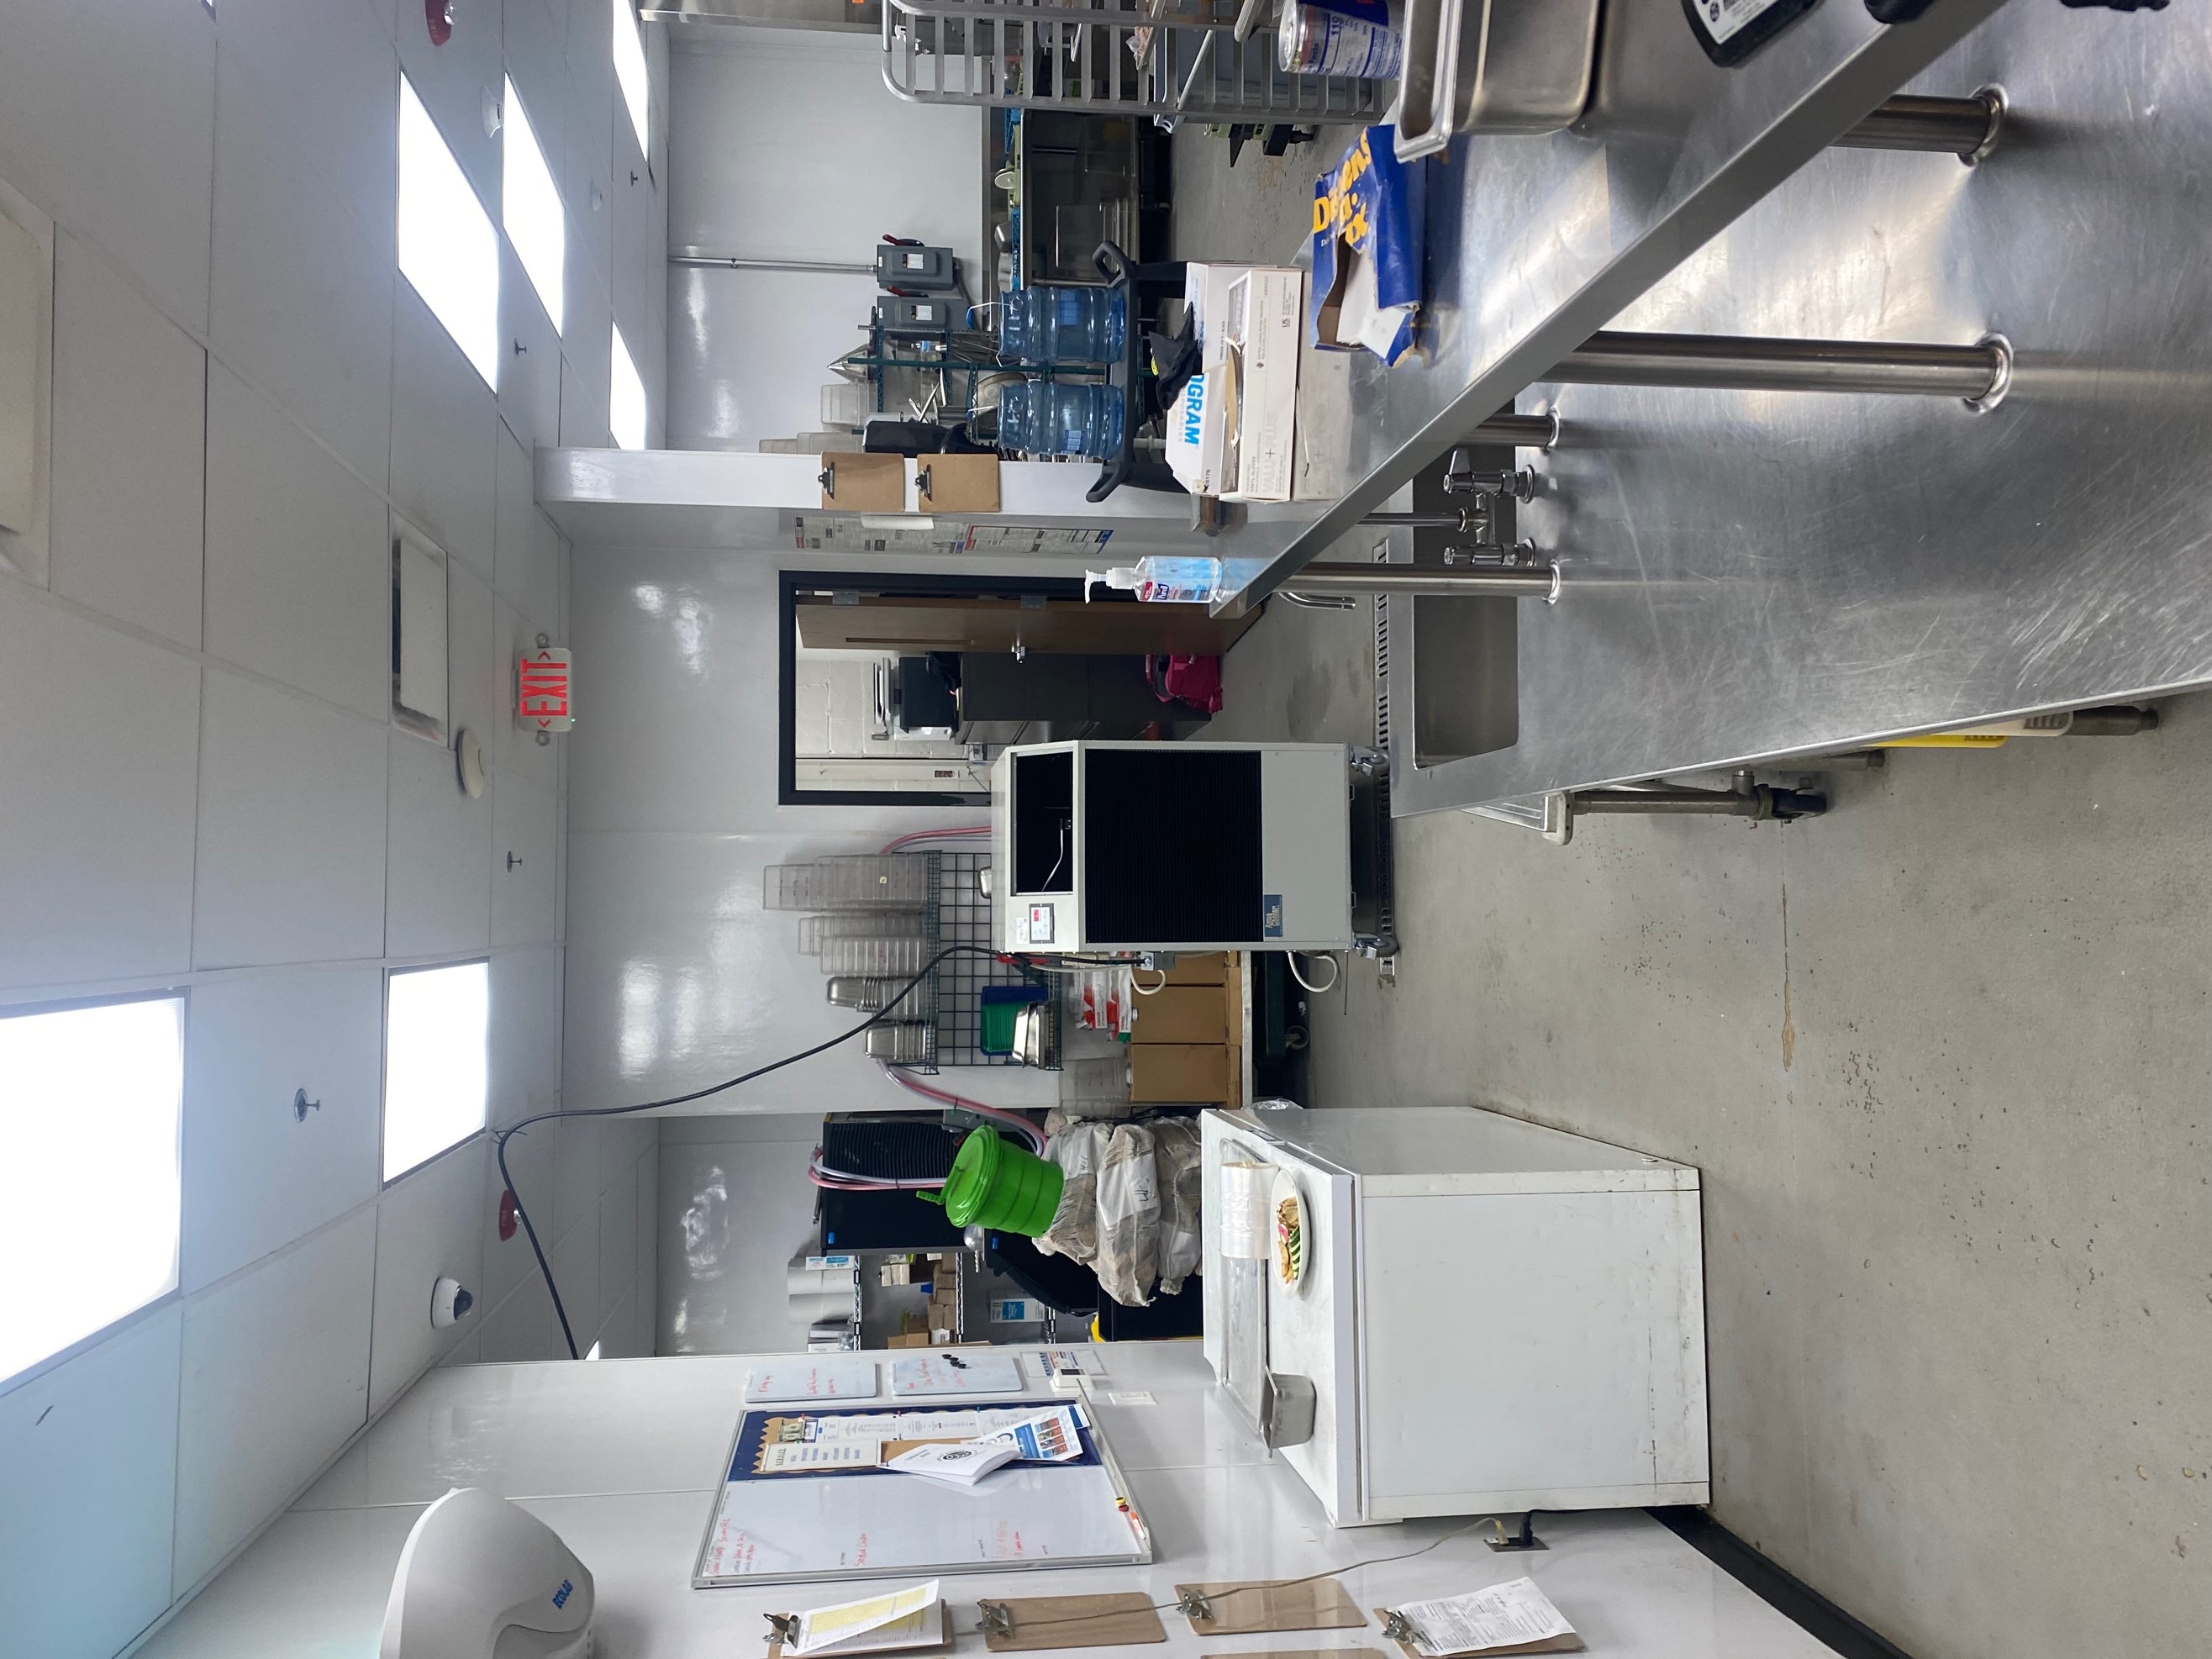 5-ton portable rental unit installed in restaurant kitchen with electrical cord routed across the drop ceiling tiles. 